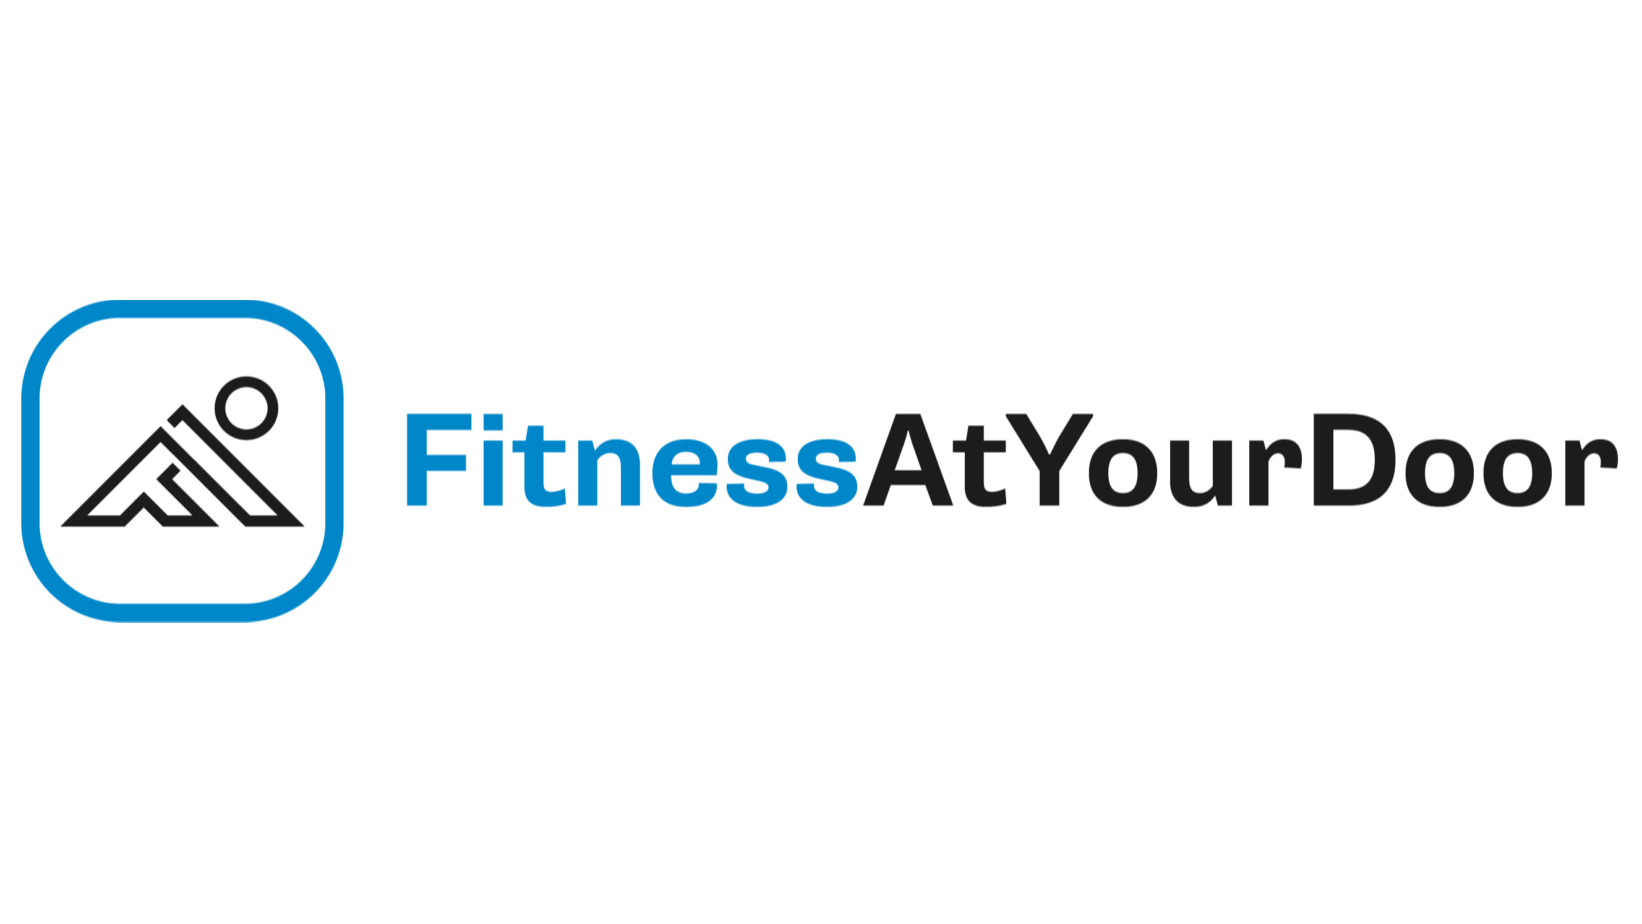 Get Free Fitness Training Client Leads In Coral Gables With This Online Platform